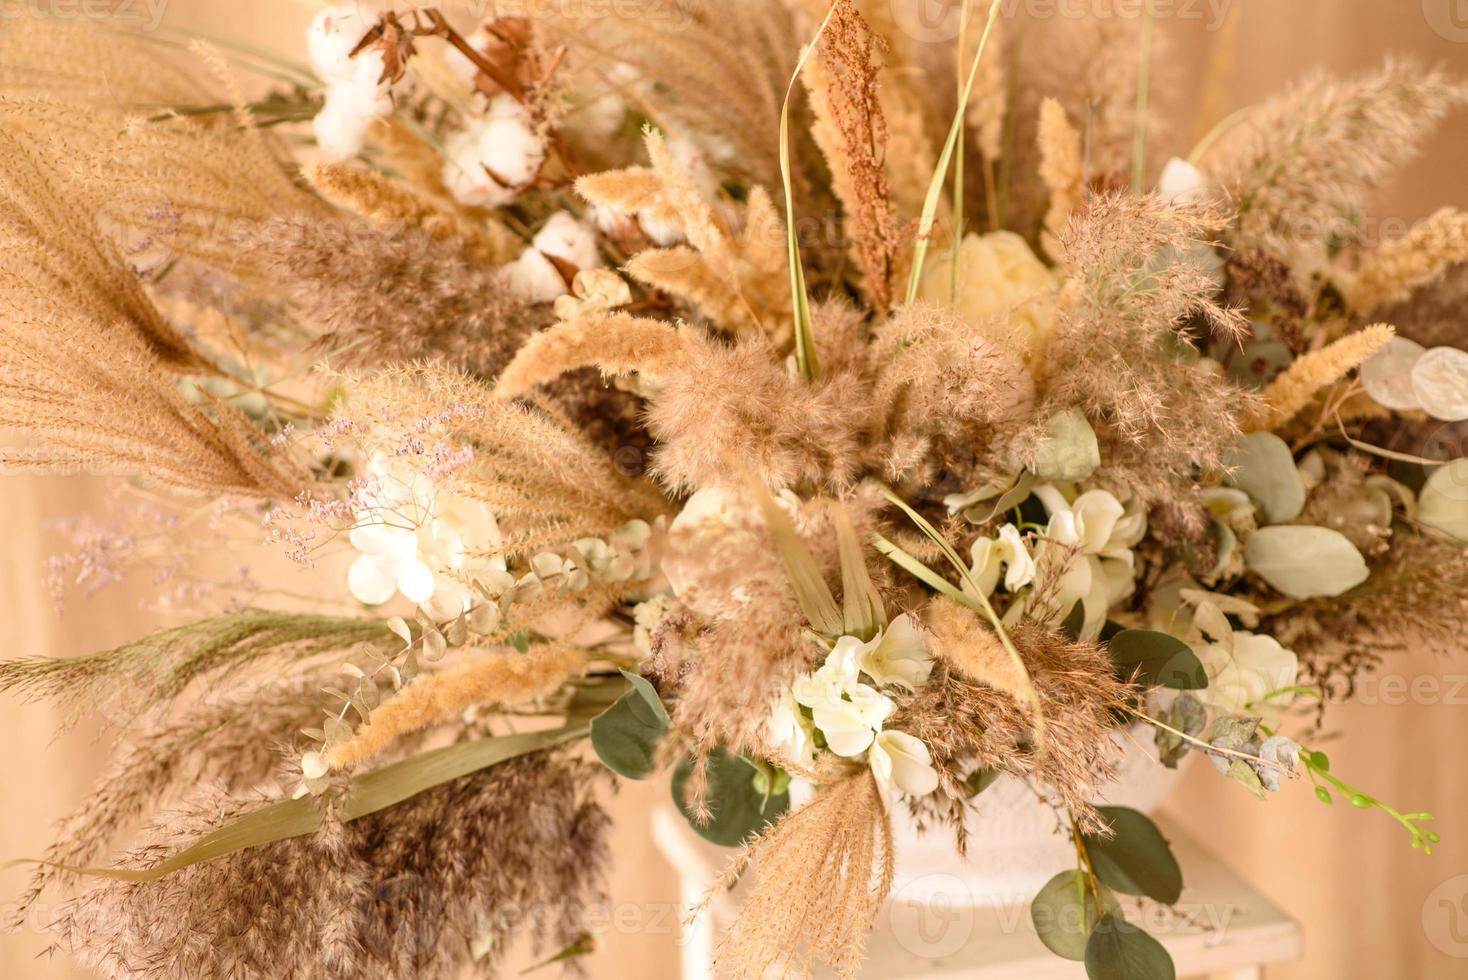 Decorations from dry beautiful flowers in a white vase on a beige fabric background photo